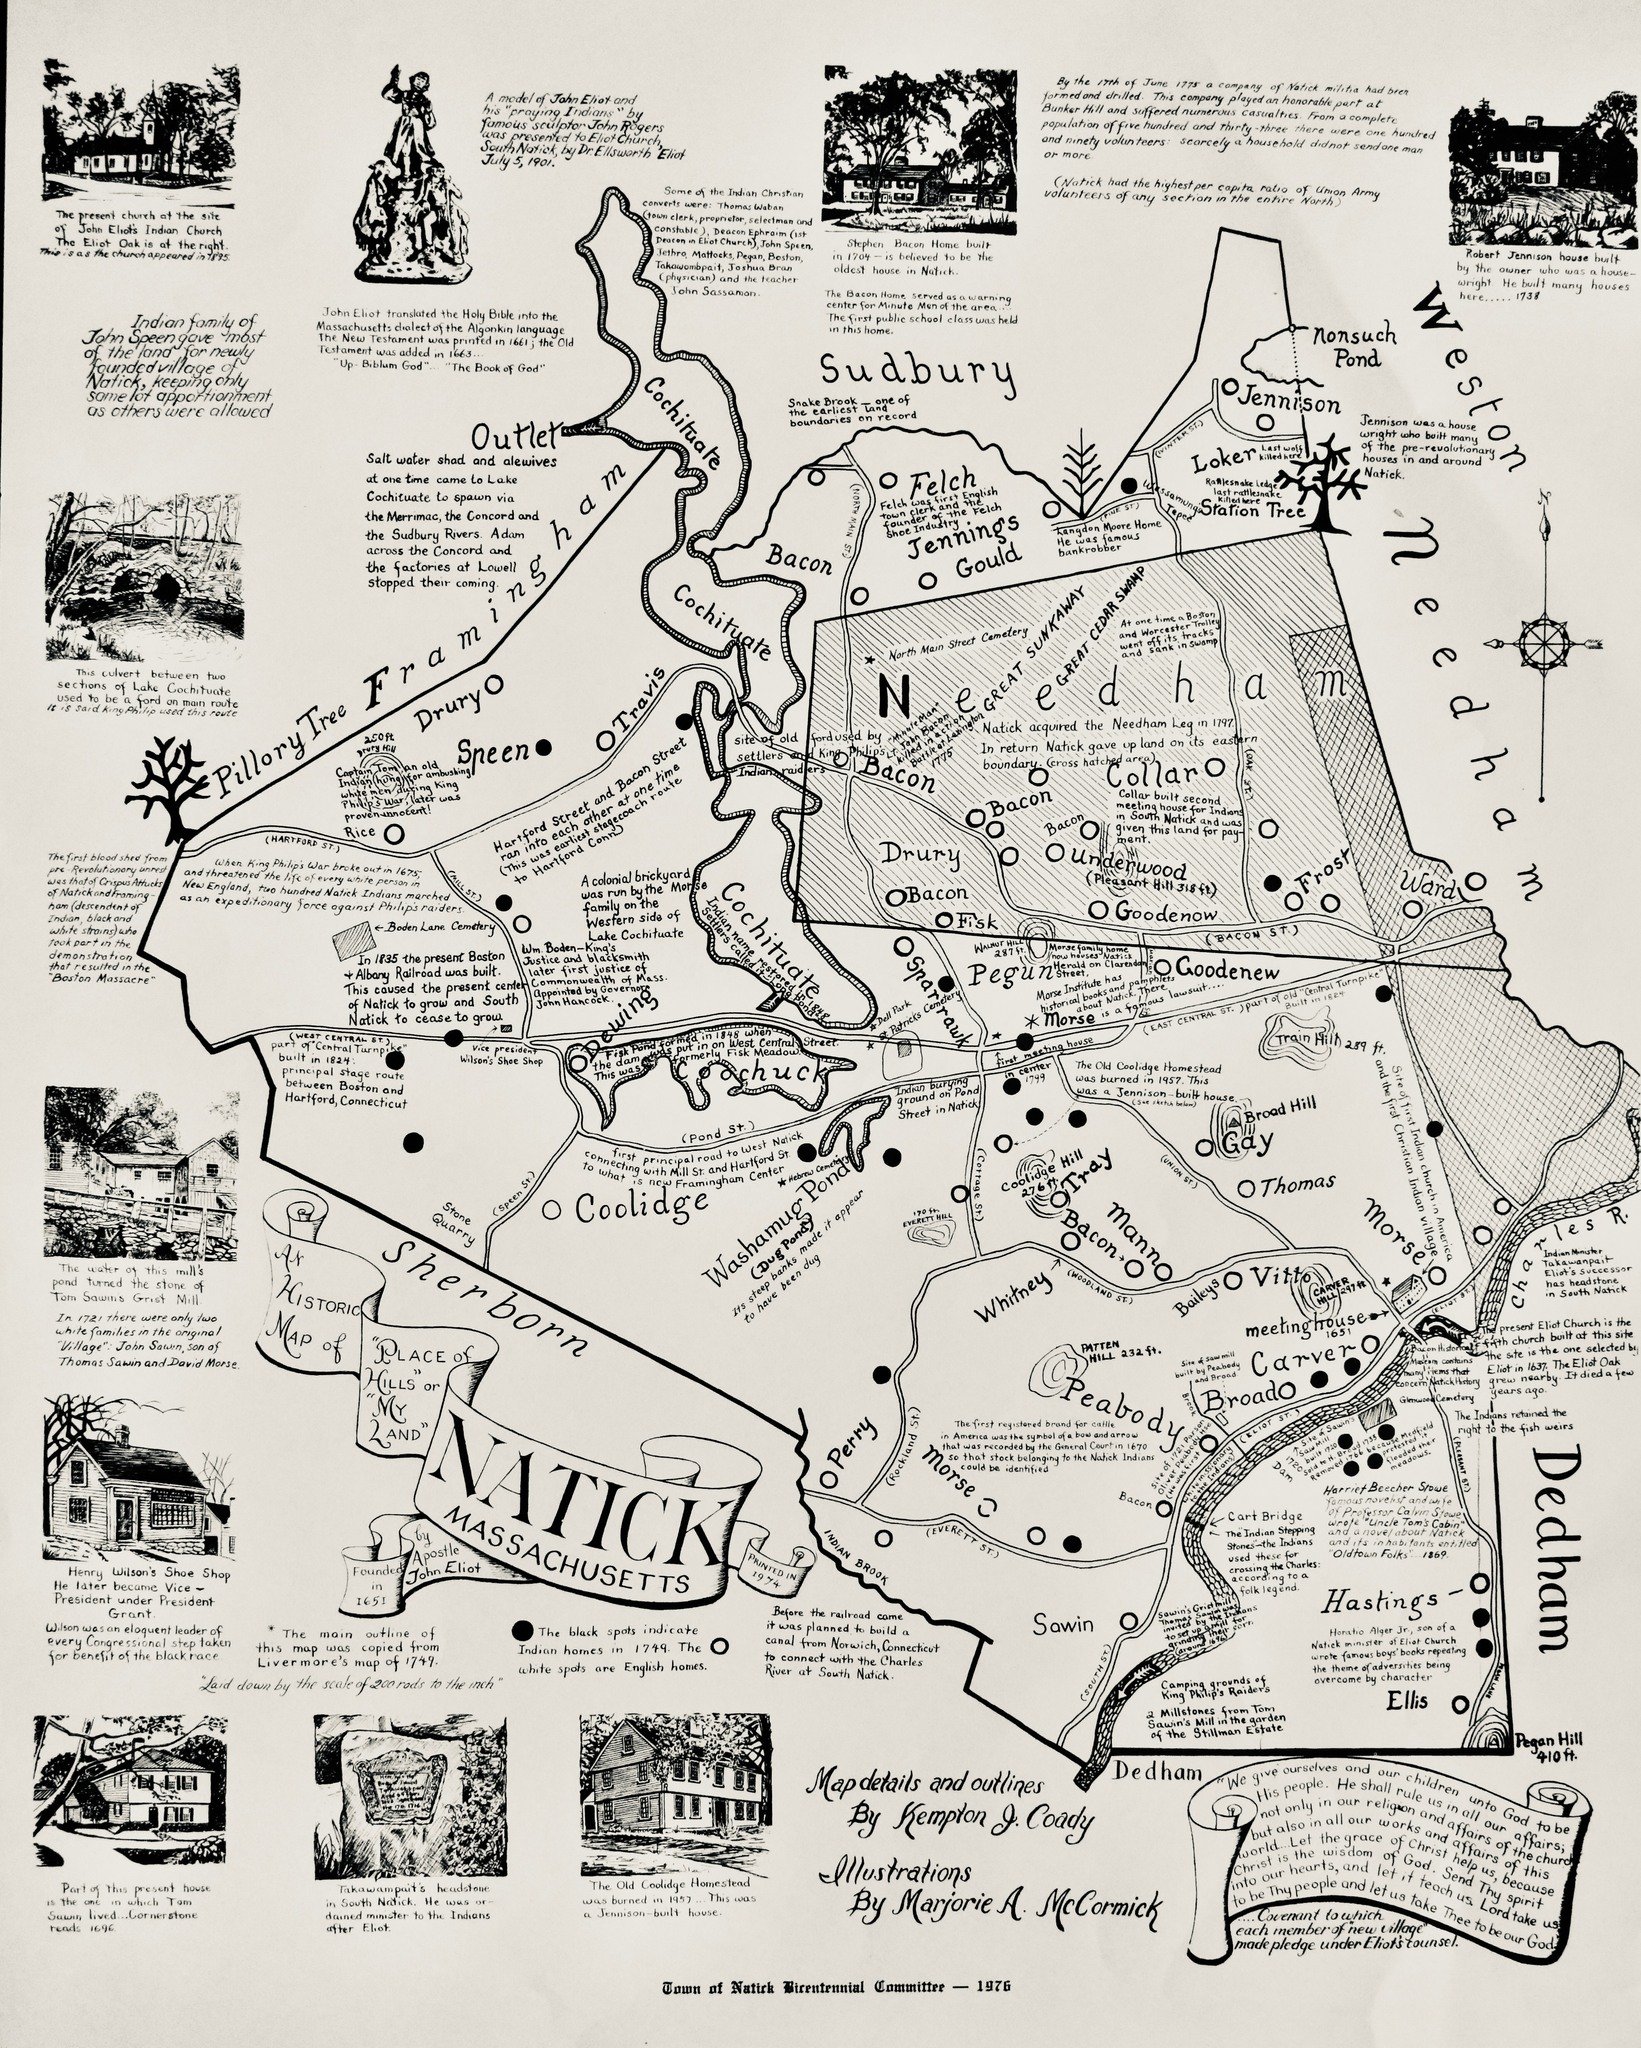 This town-wide map of Natick was created as part of bicentennial celebrations  in 1976. It details of the 18th-century land swap with Needham, and other historical events and sites around town. From the Natick Bulletin of April 1976, &quot;This map i